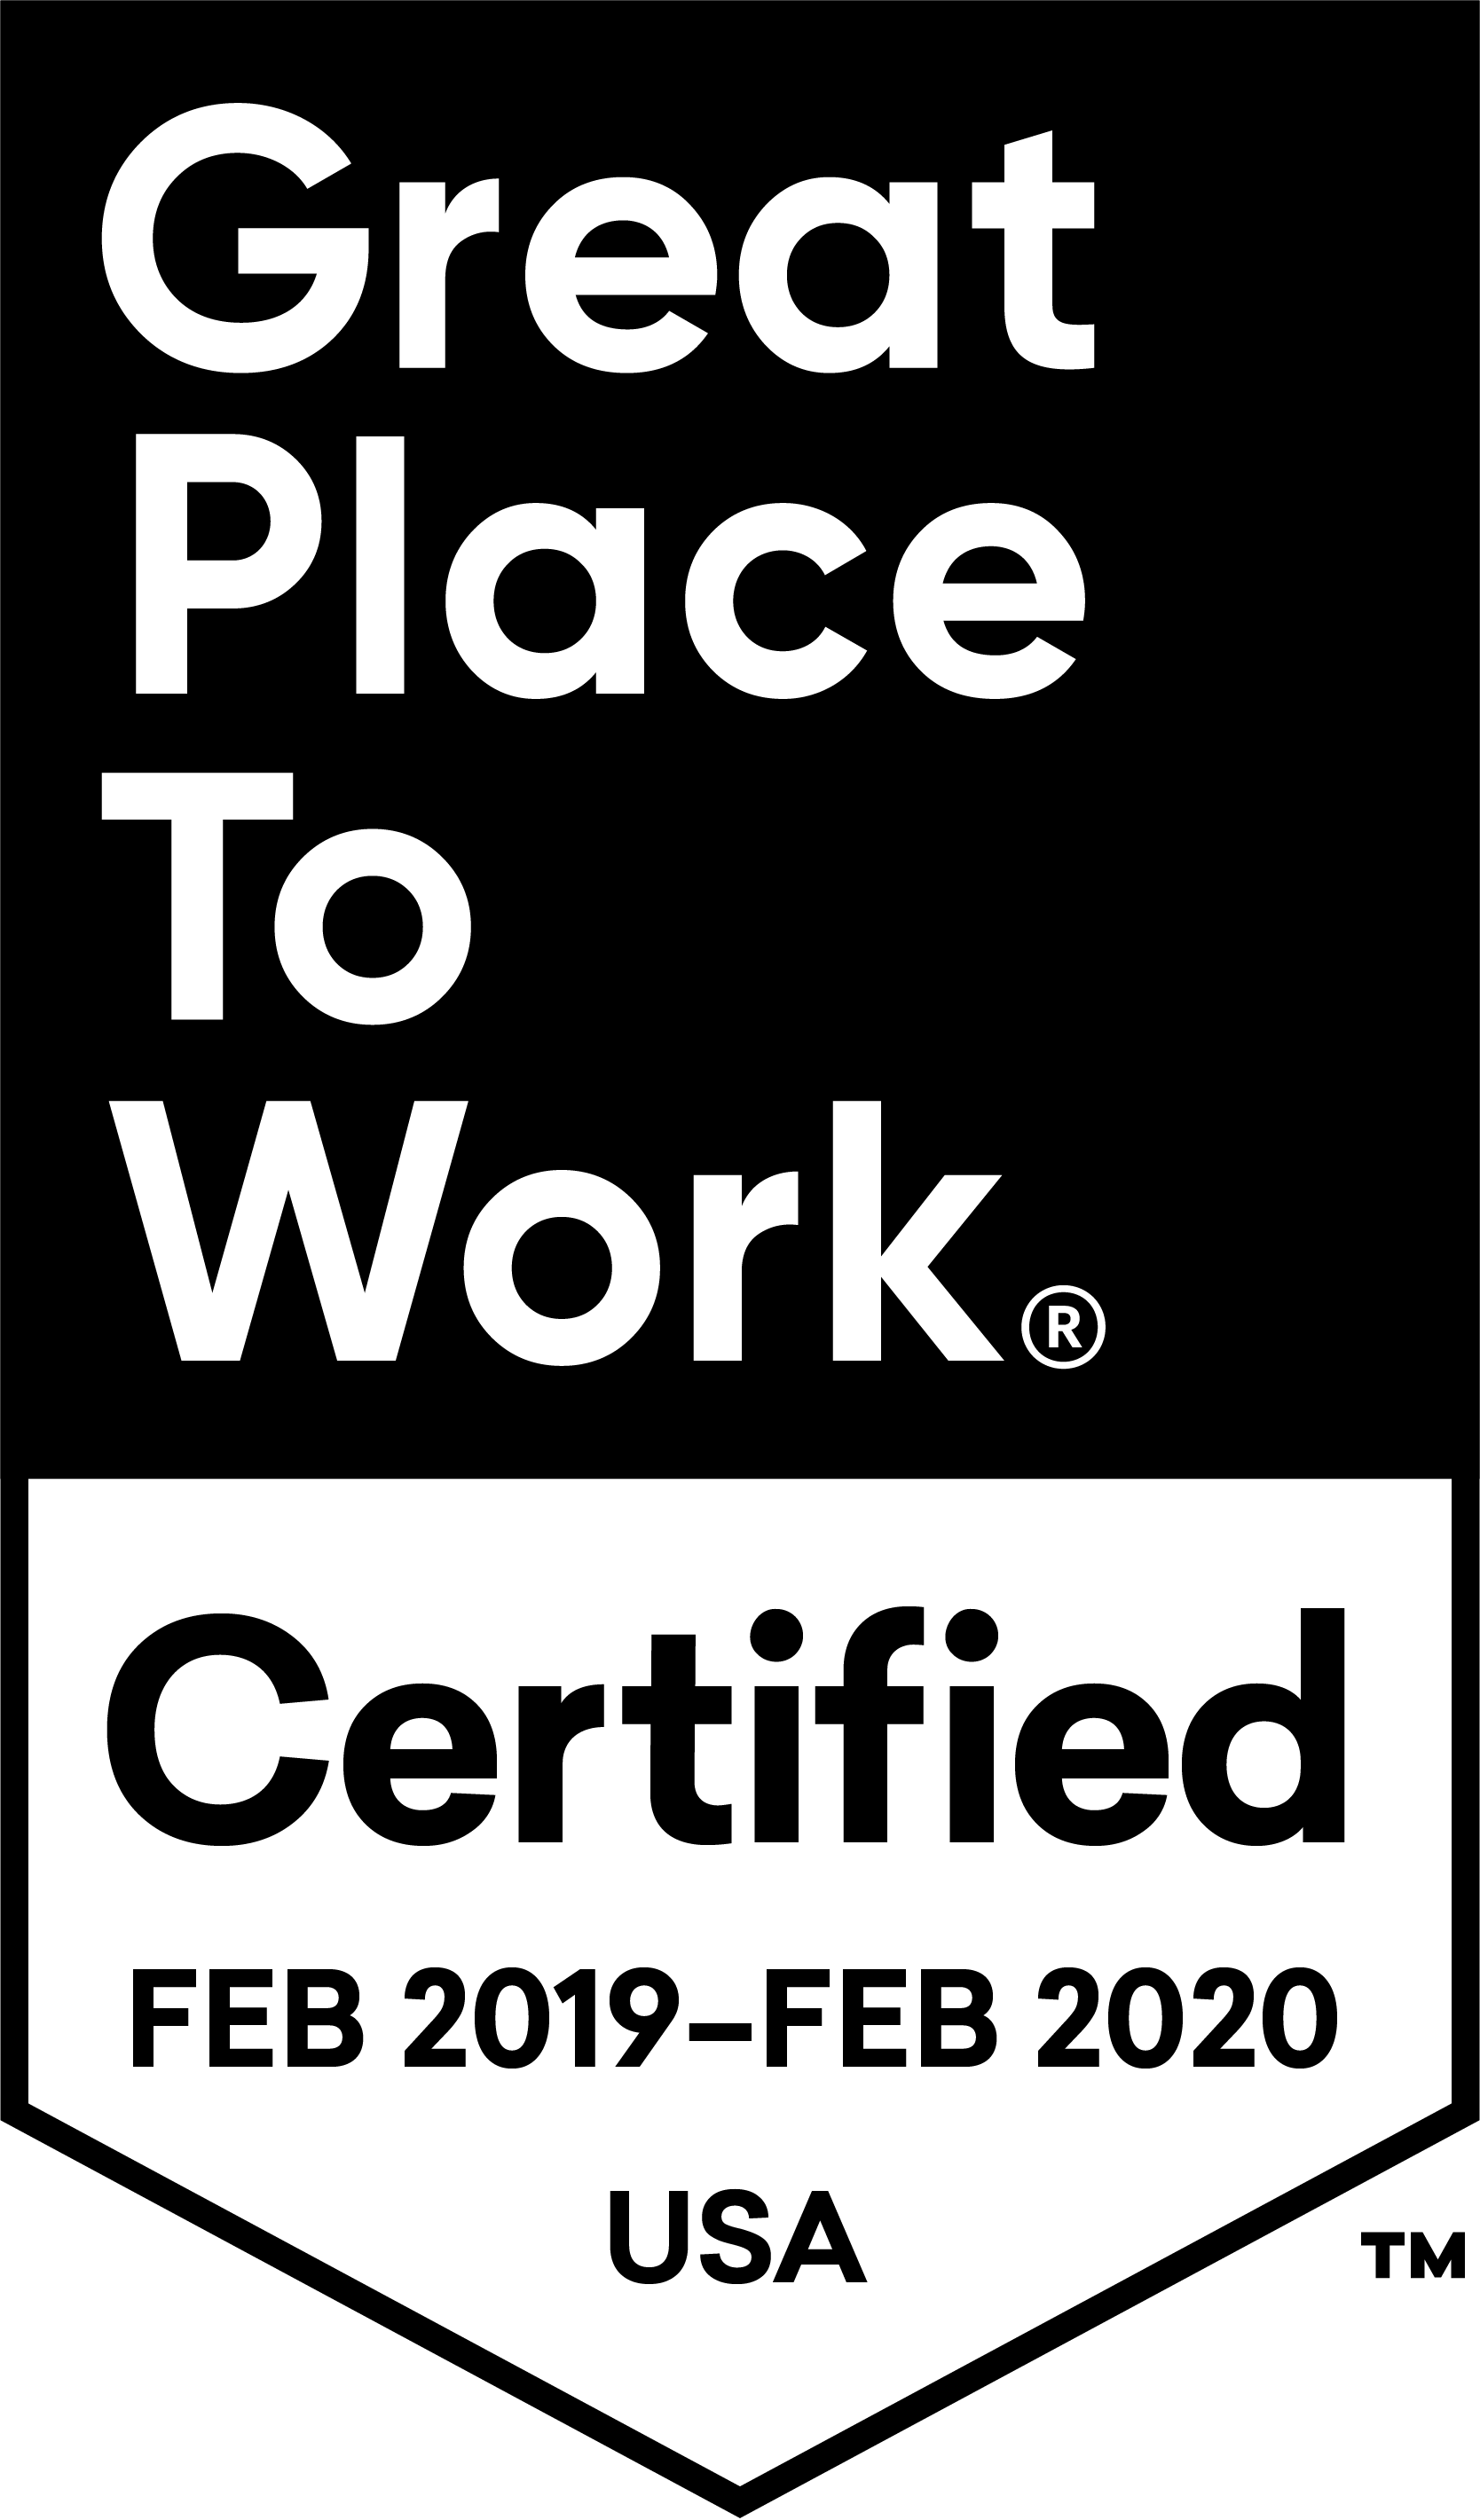 Great Place to Work Certified February 2019 - February 2020